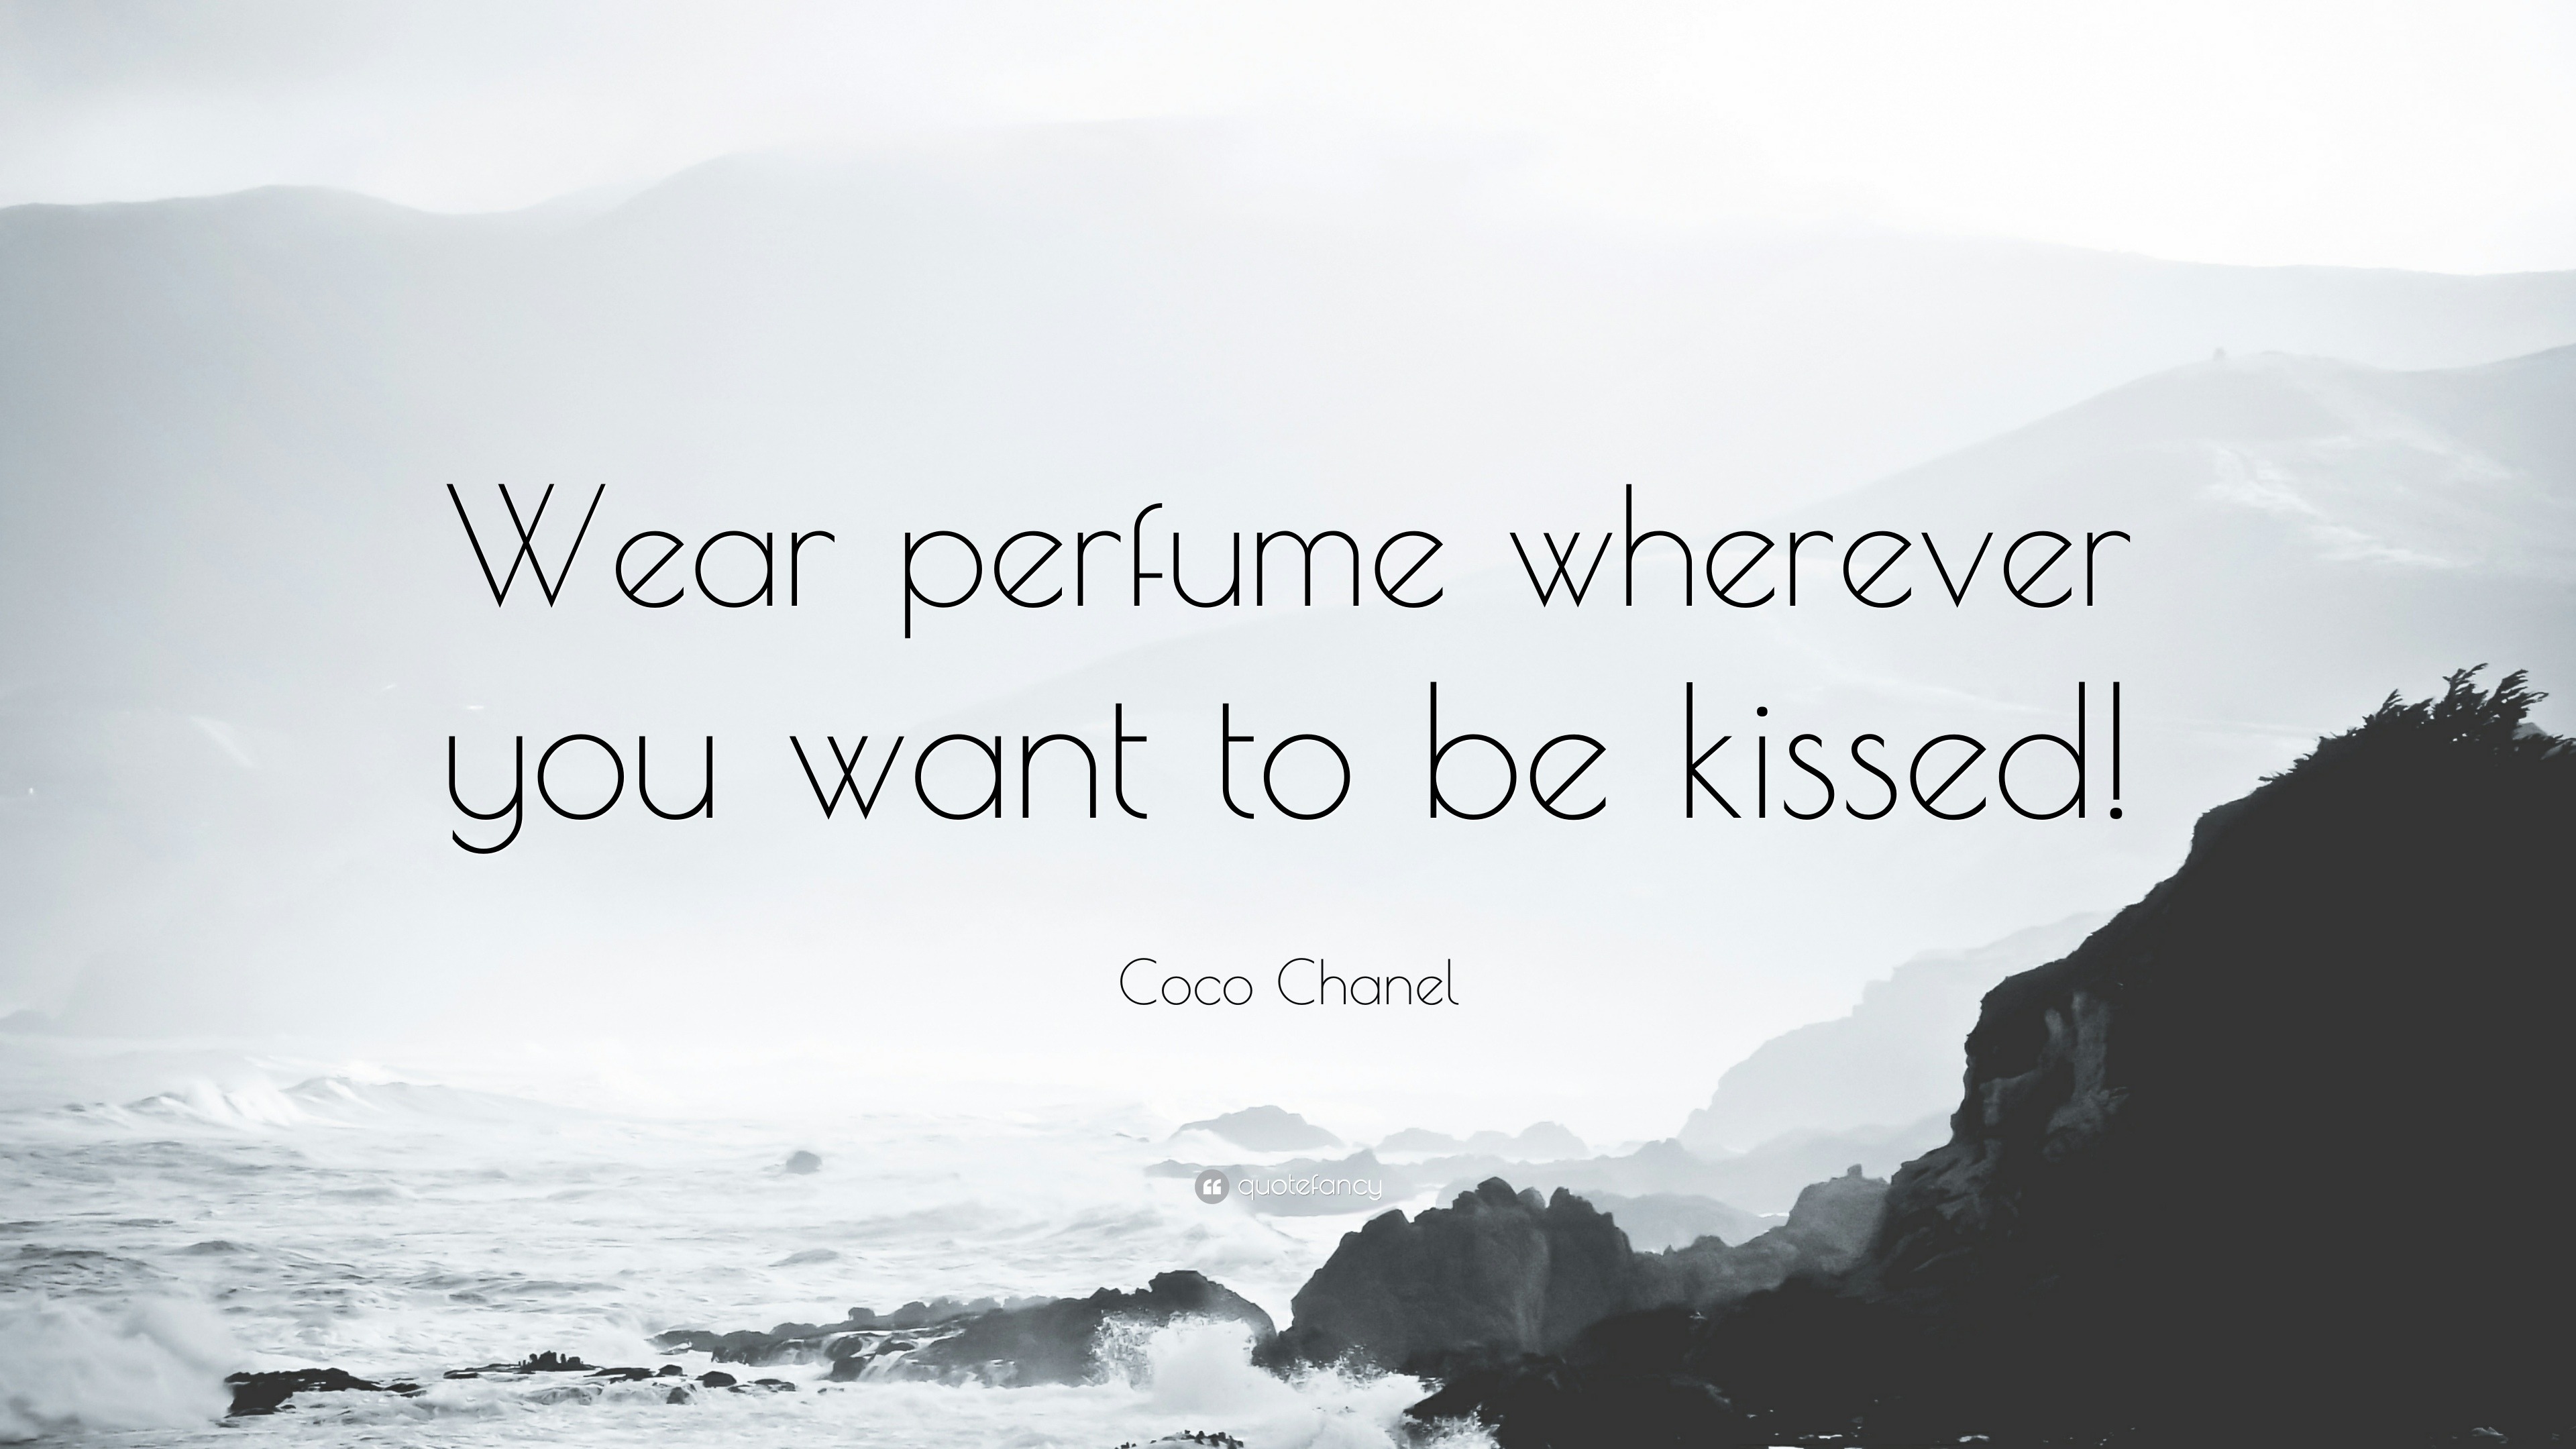 Coco Chanel Quote: Where should one use perfume? a young woman asked.  Wherever one wants to be kissed.